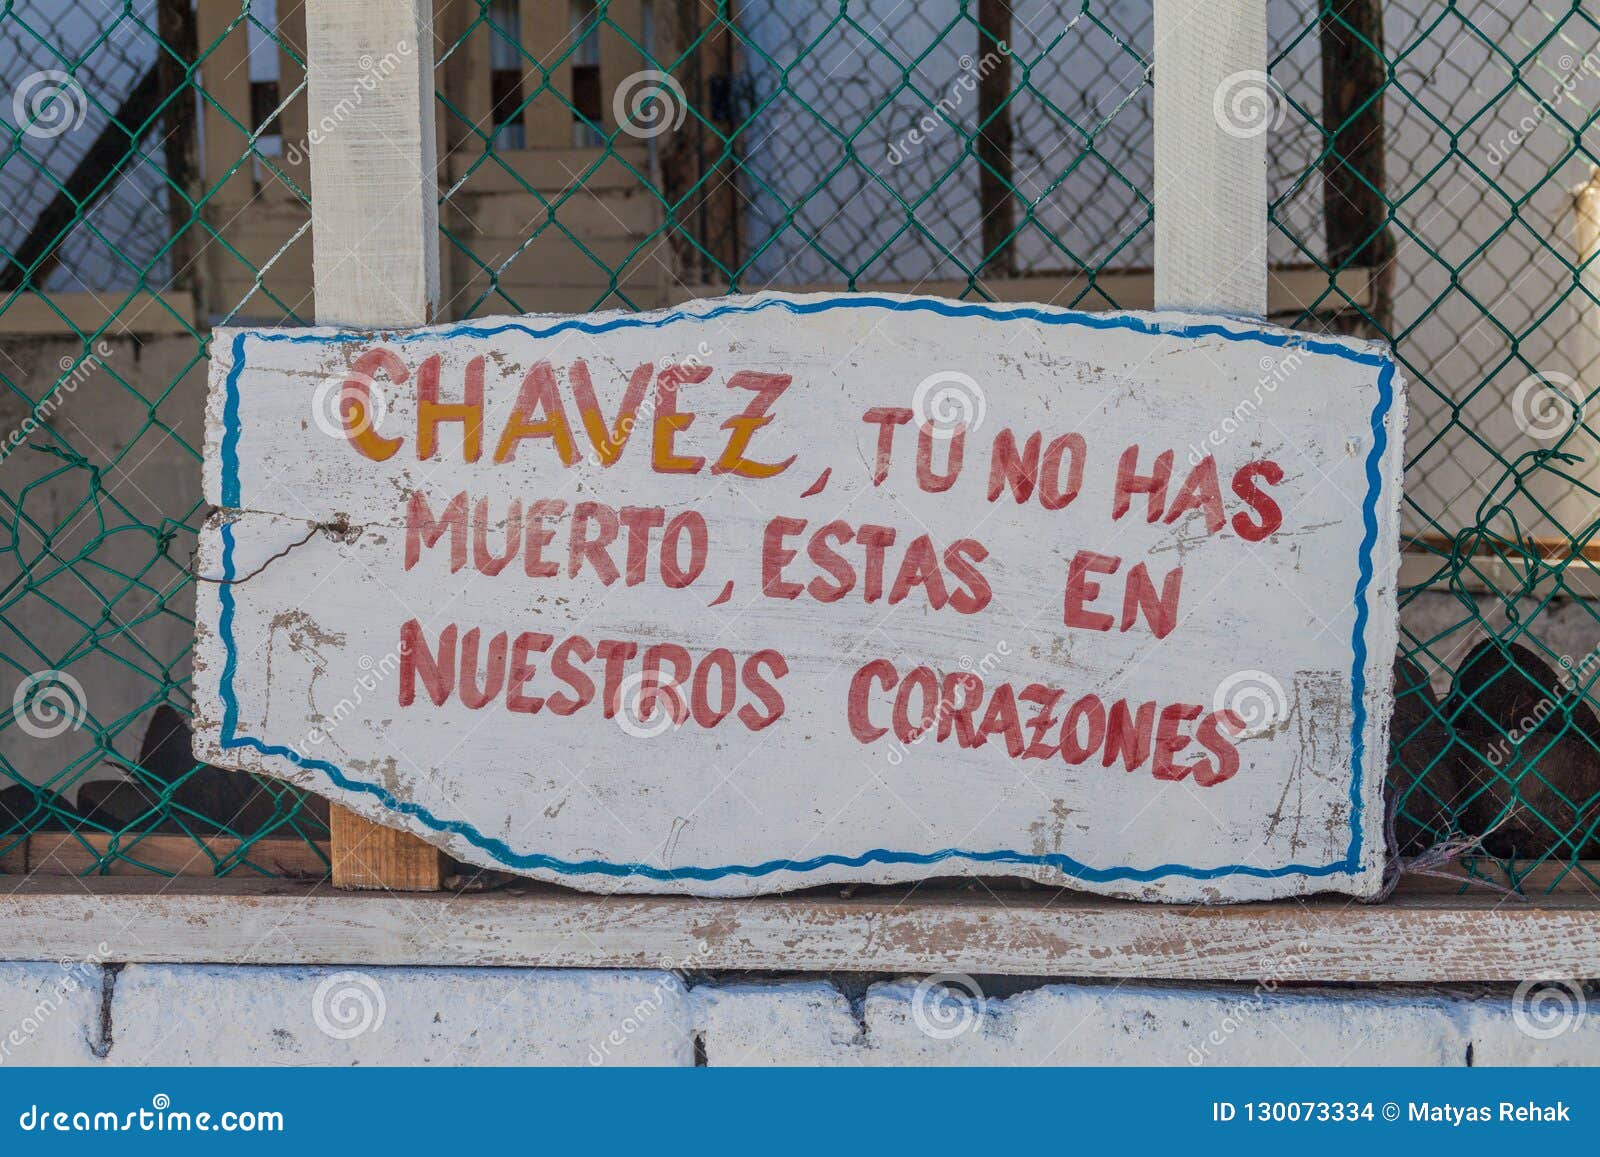 propaganda near baracoa, cuba. it says: chavez, you did not die, you are staying in ou heart